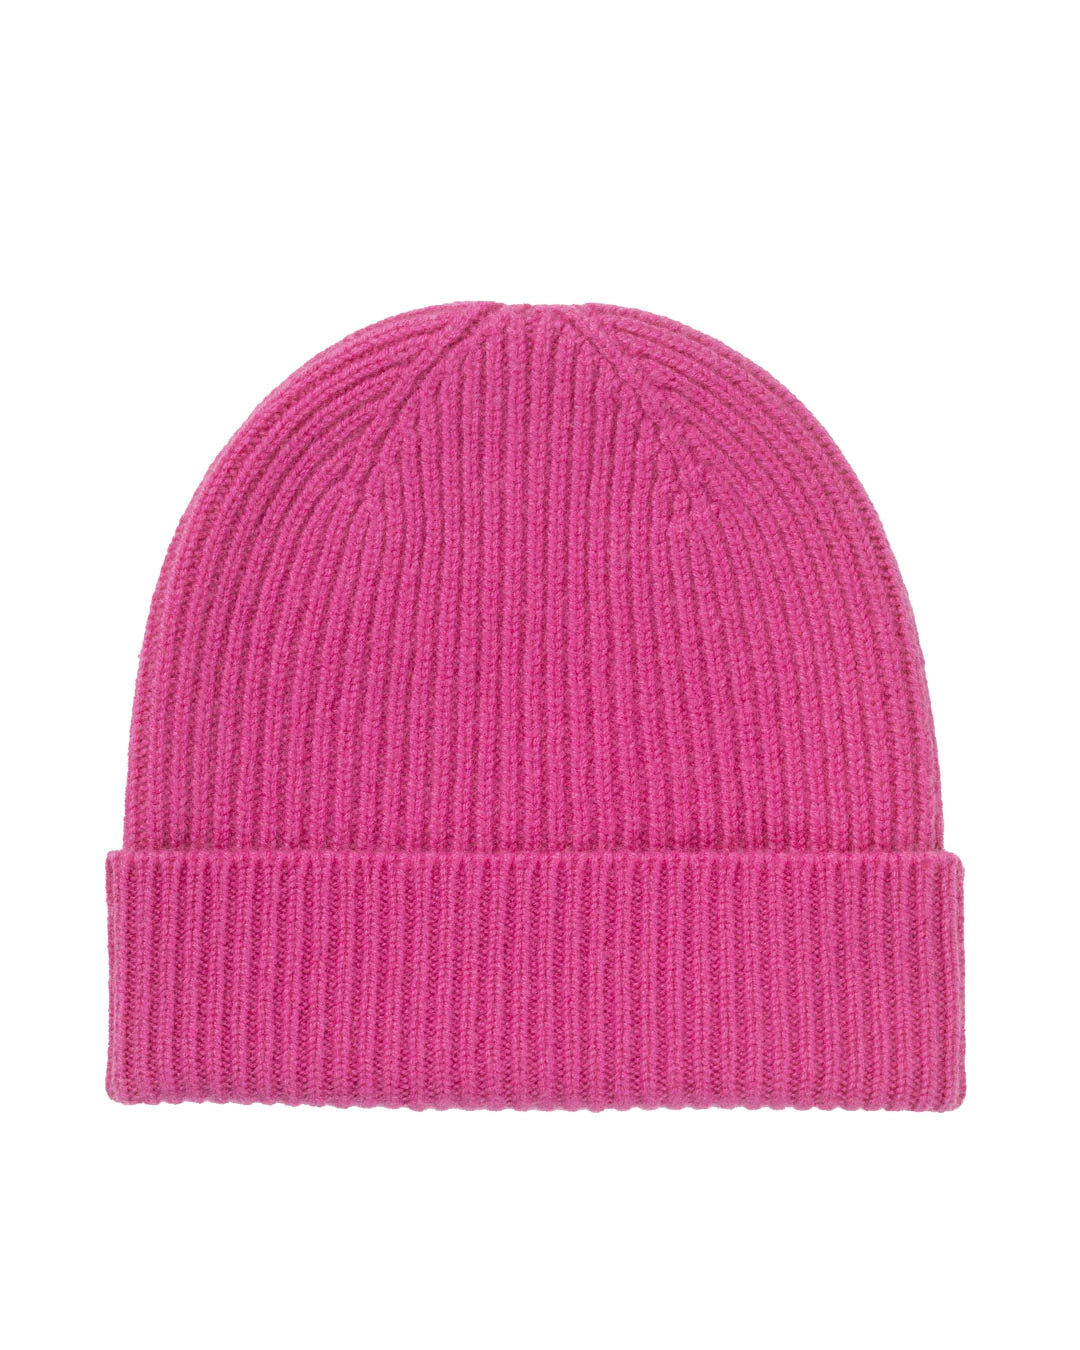 Hot Pink Cashmere Hat - 4ply - ribbed